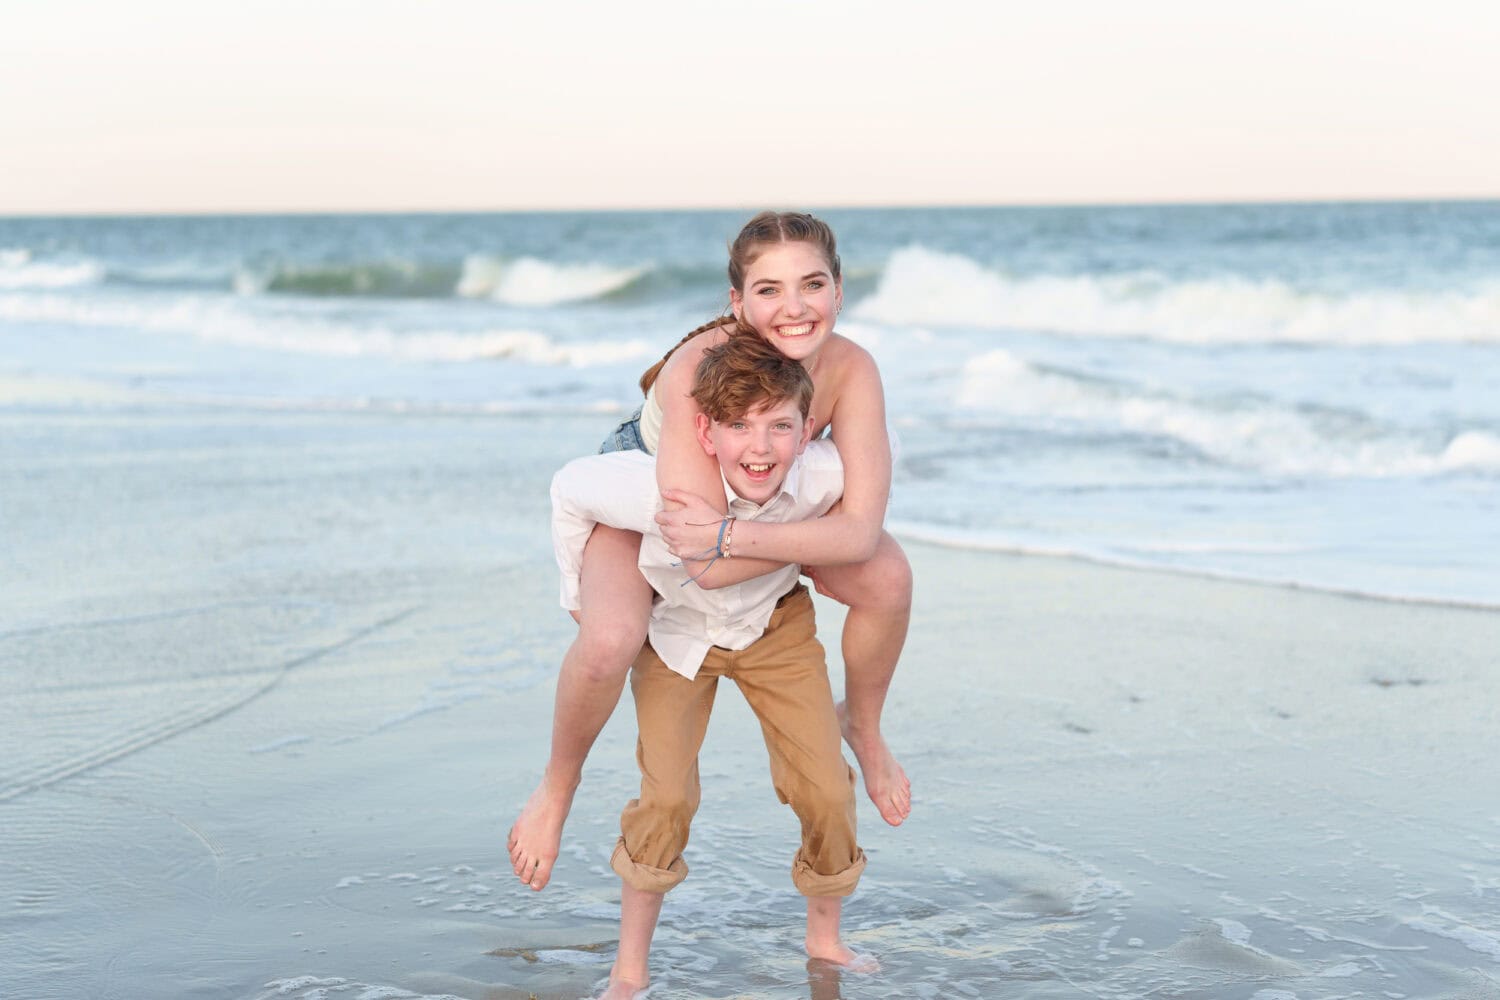 Brother giving his big sister a piggyback ride - Huntington Beach State Park